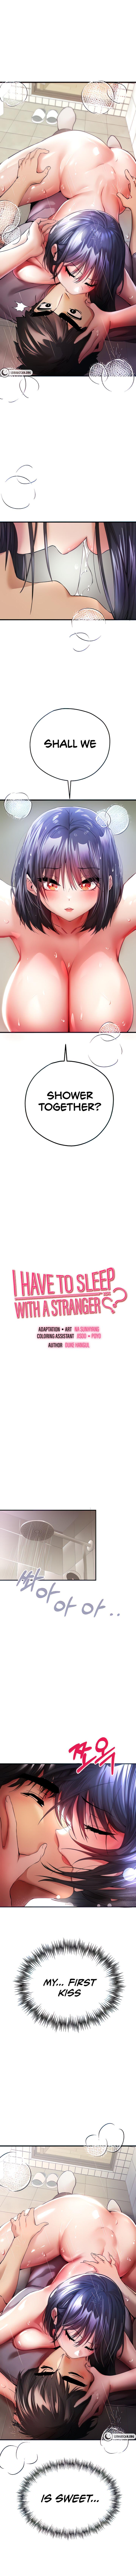 I Have To Sleep With A Stranger? 197